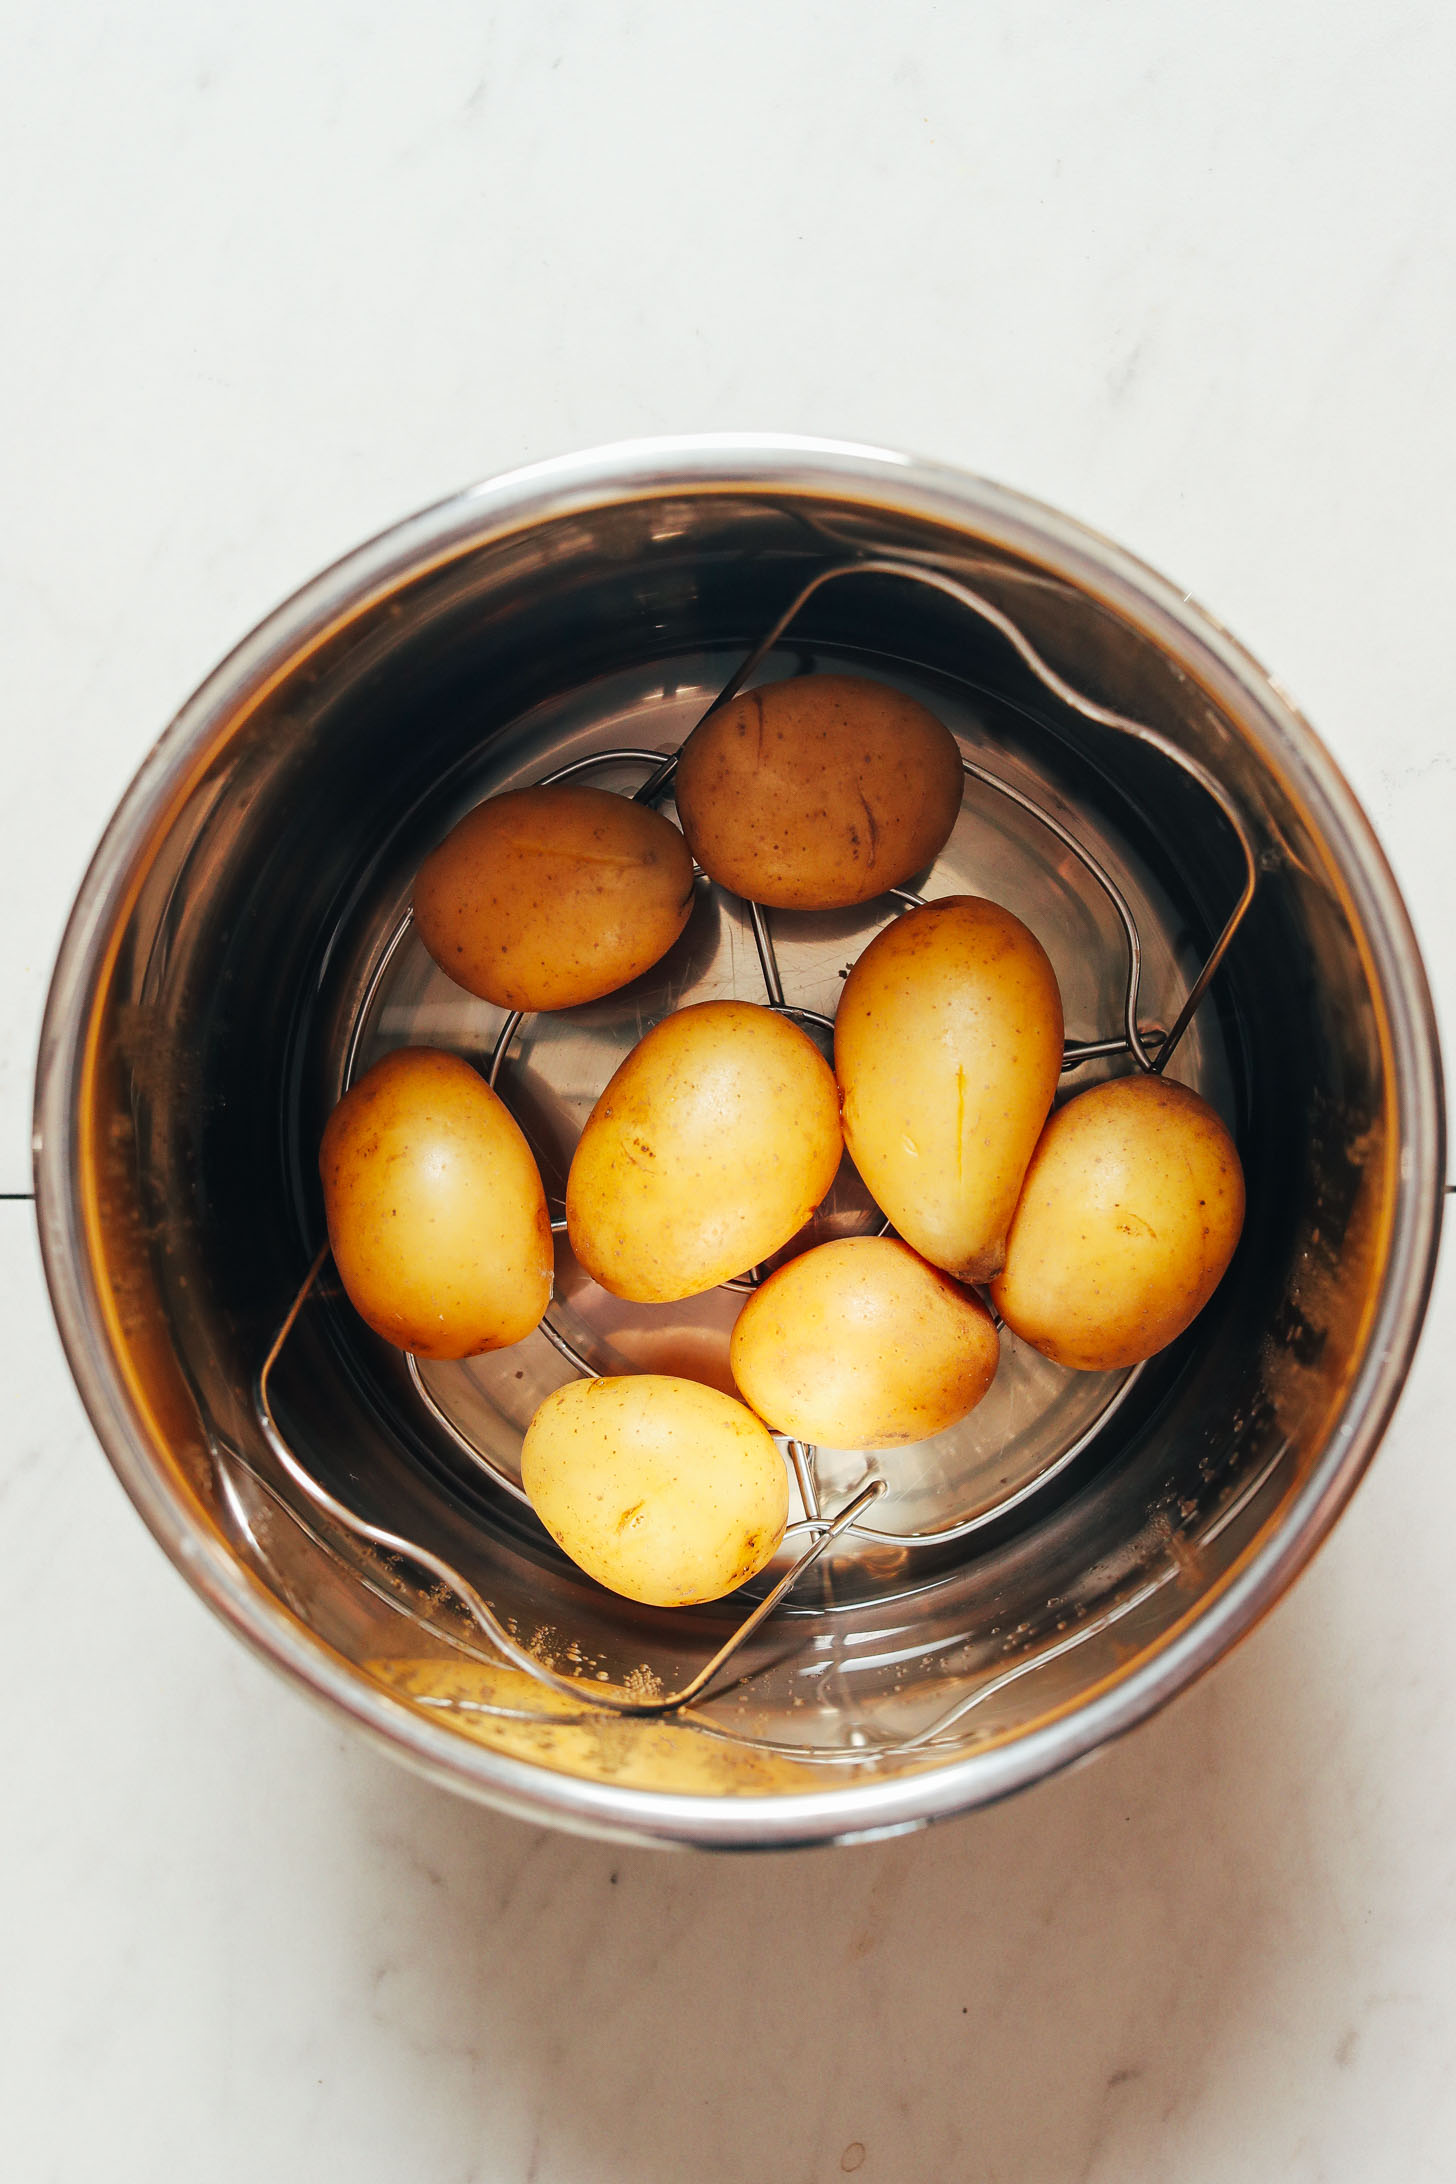 Gold potatoes on a trivet in the Instant Pot